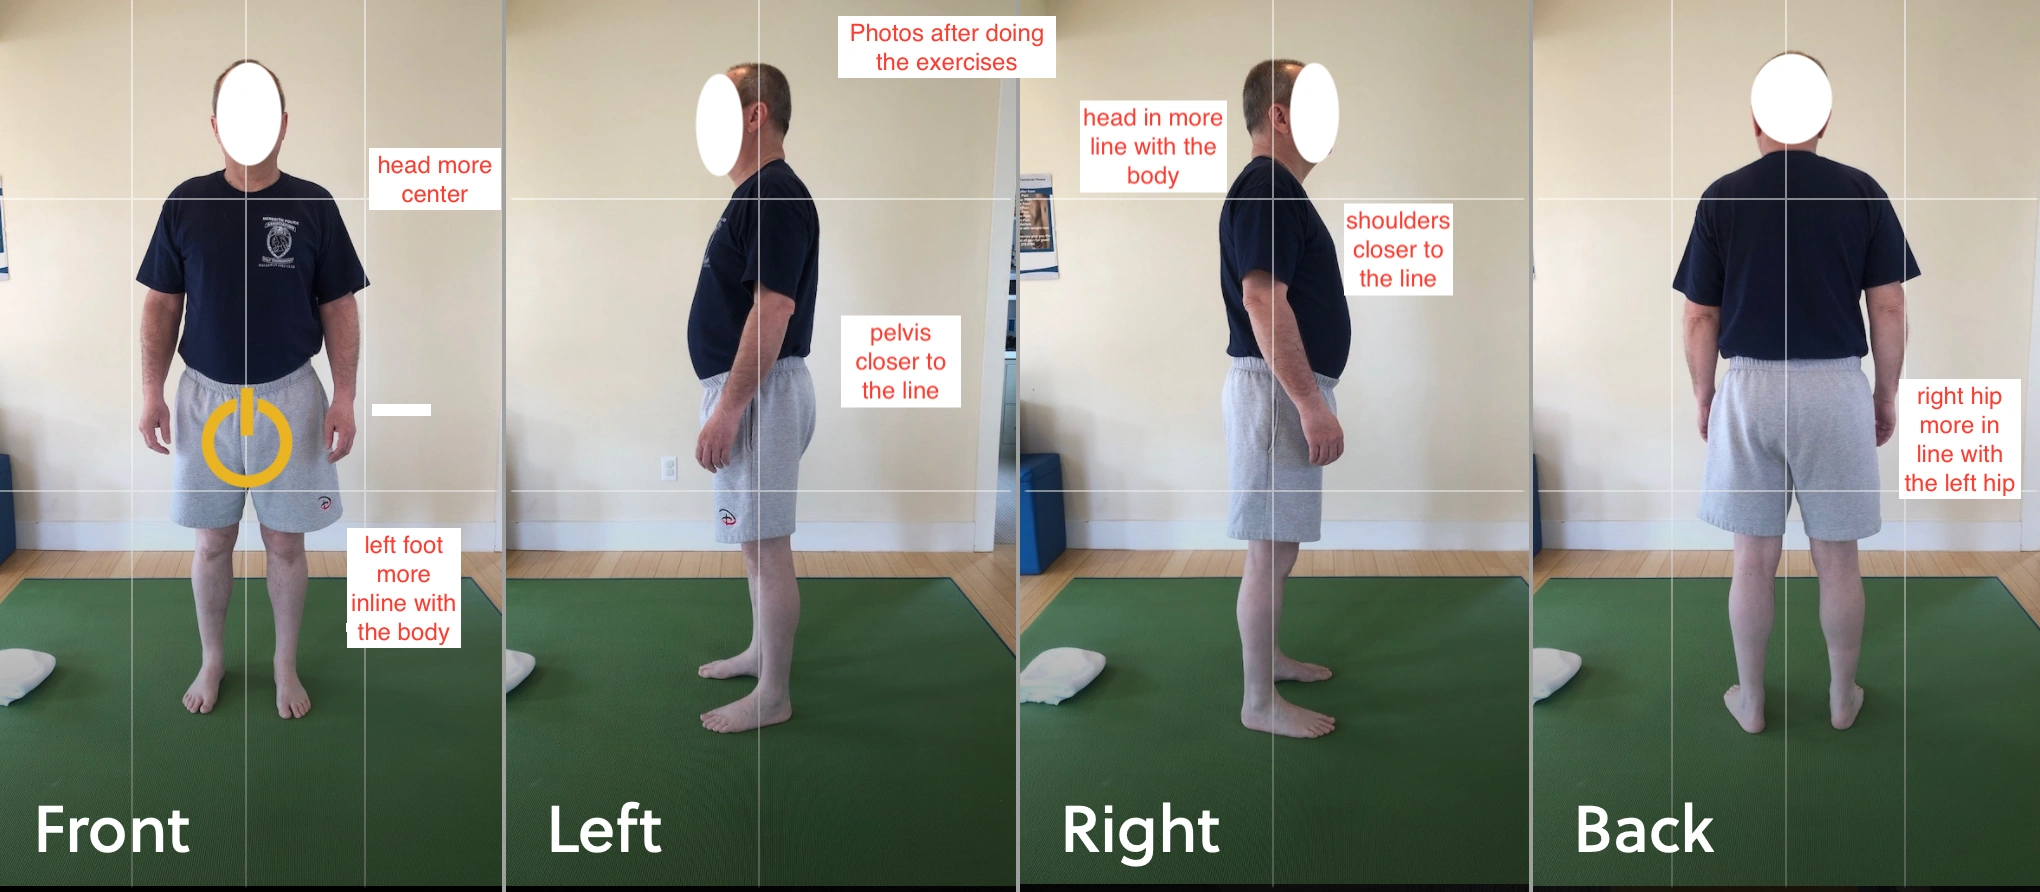 client02-before-and-after-02 - Upright Posture Fitness - Look